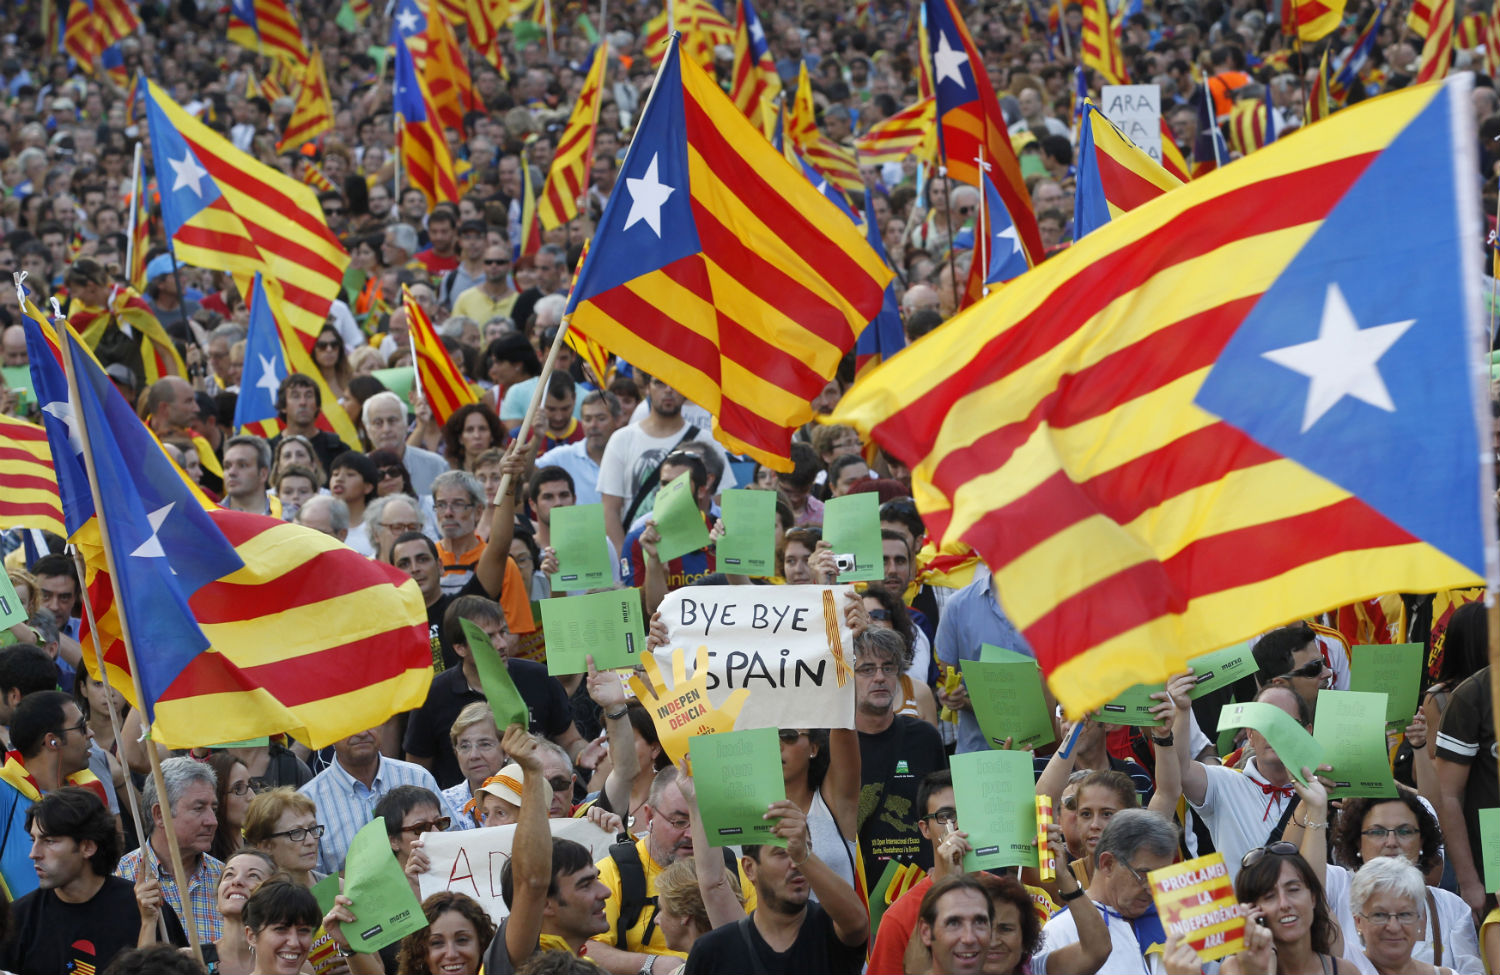 How Ethnic Tensions and Economic Crisis Have Strengthened Europe’s Secession Movements